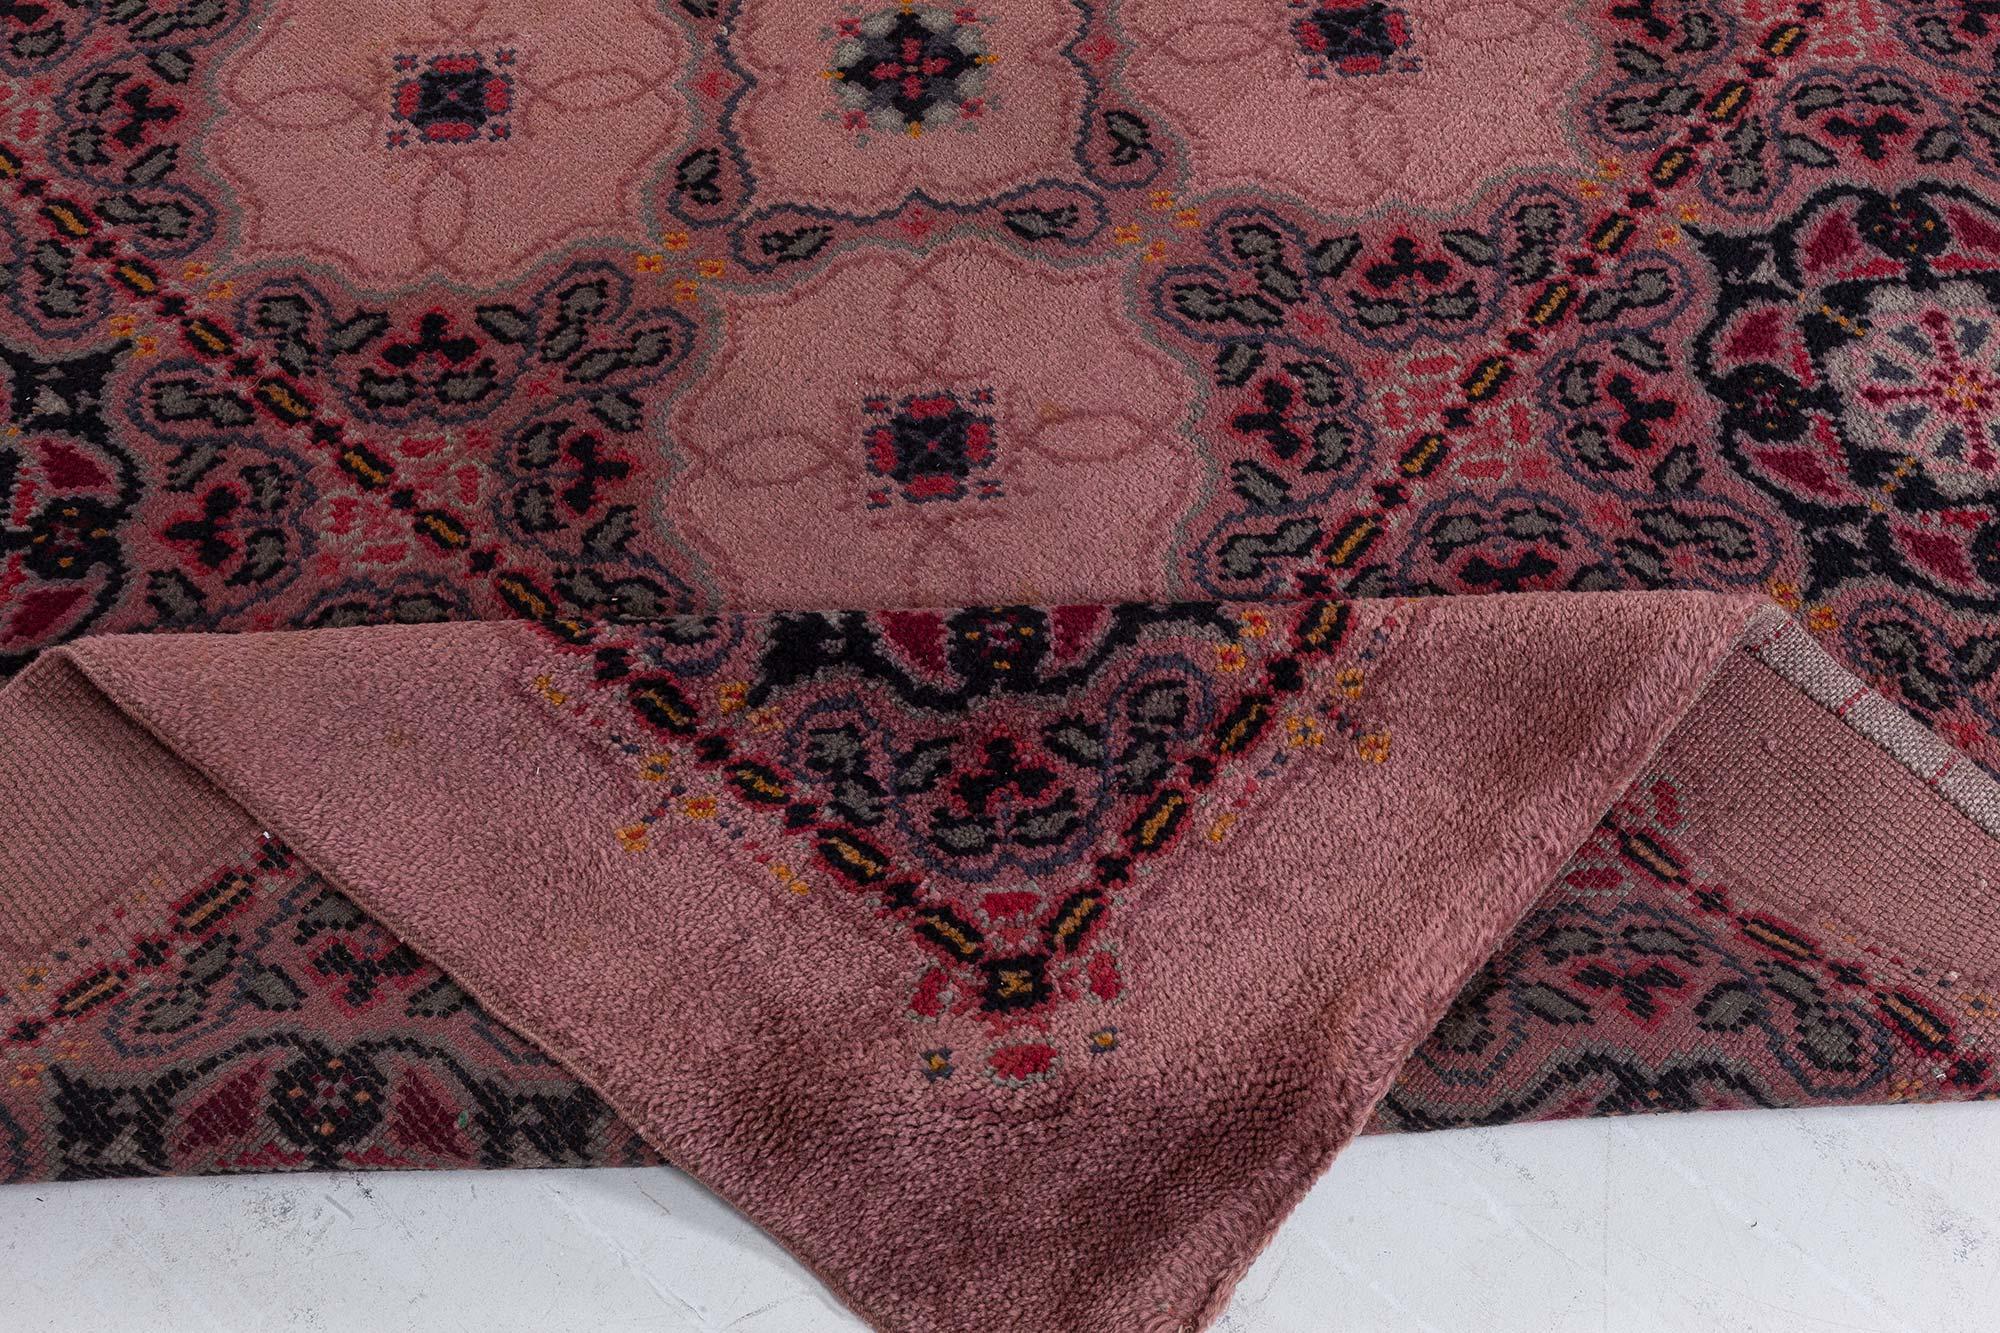 Antique Amsterdam School Design Rug Attributed To KCP De Bazel Executed by KVT In Good Condition For Sale In New York, NY